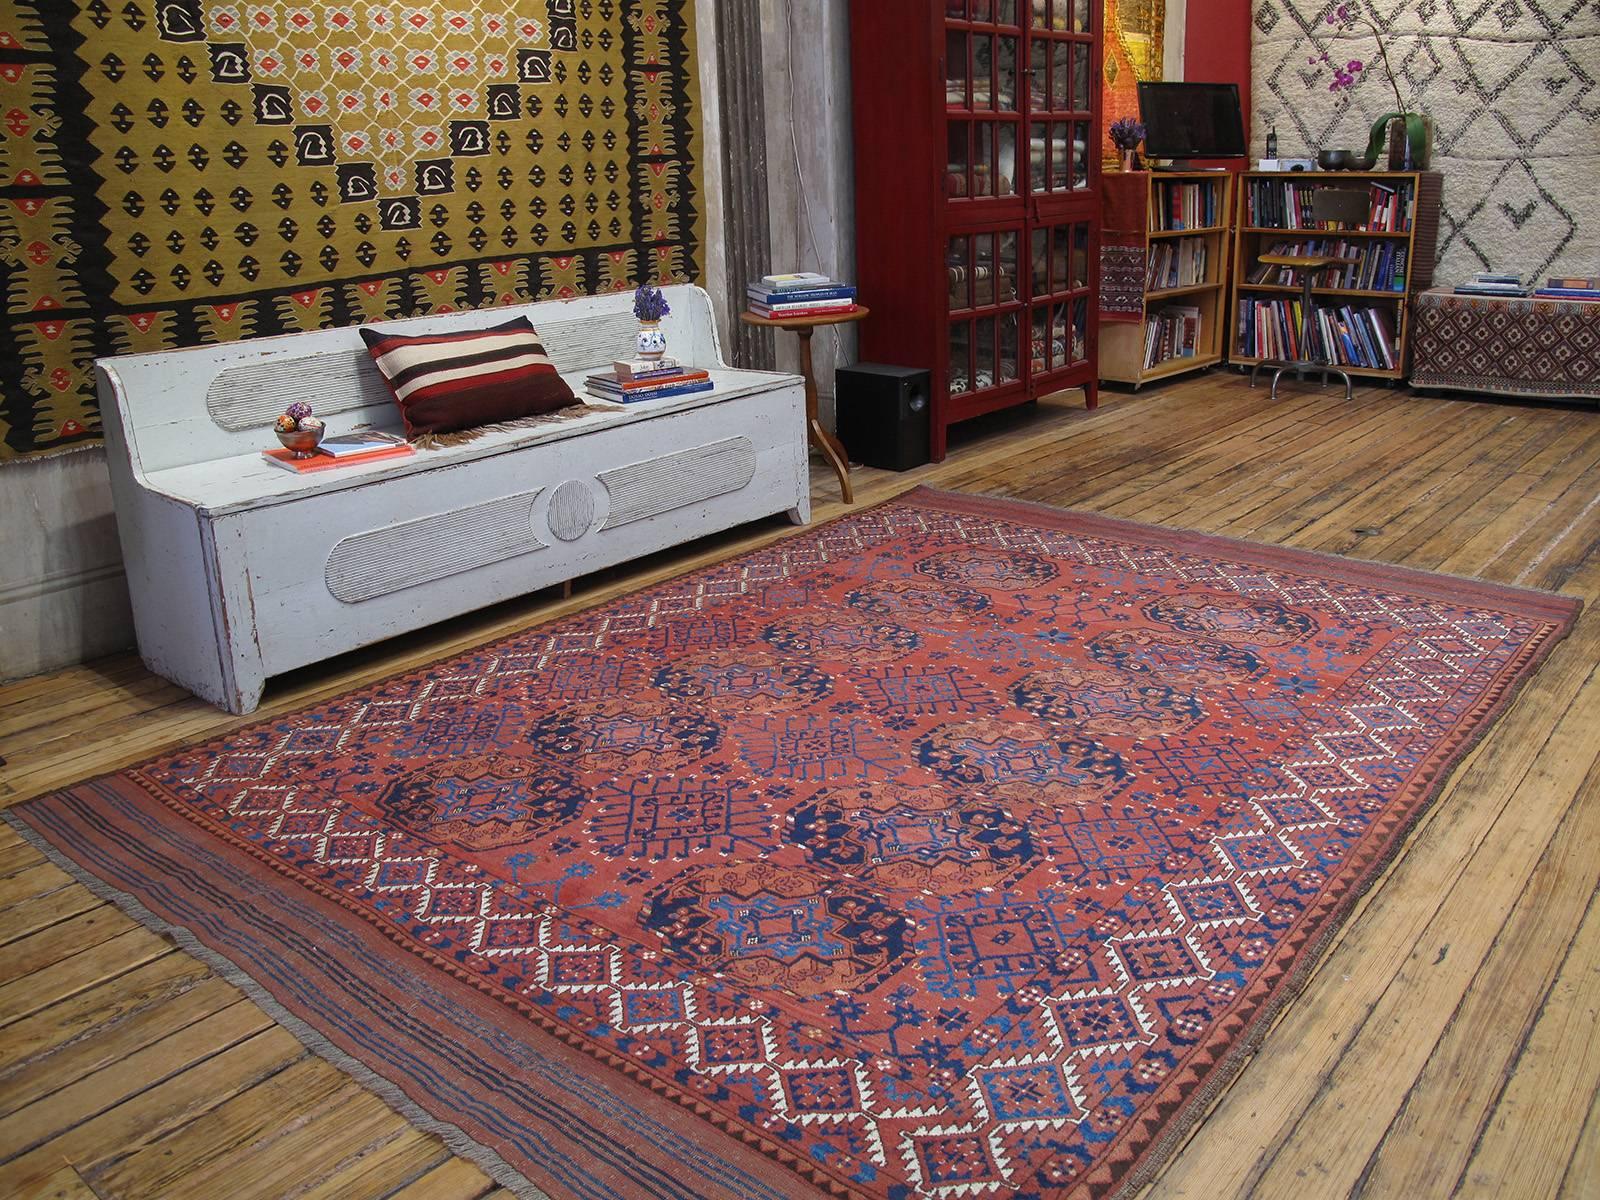 Antique Turkmen Main carpet or rug. An antique tribal carpet from Central Asia attributed to the Ersari Turkmen. Deeply saturated colors, dominated by rich madder reds, repetitive heraldic symbols, called 